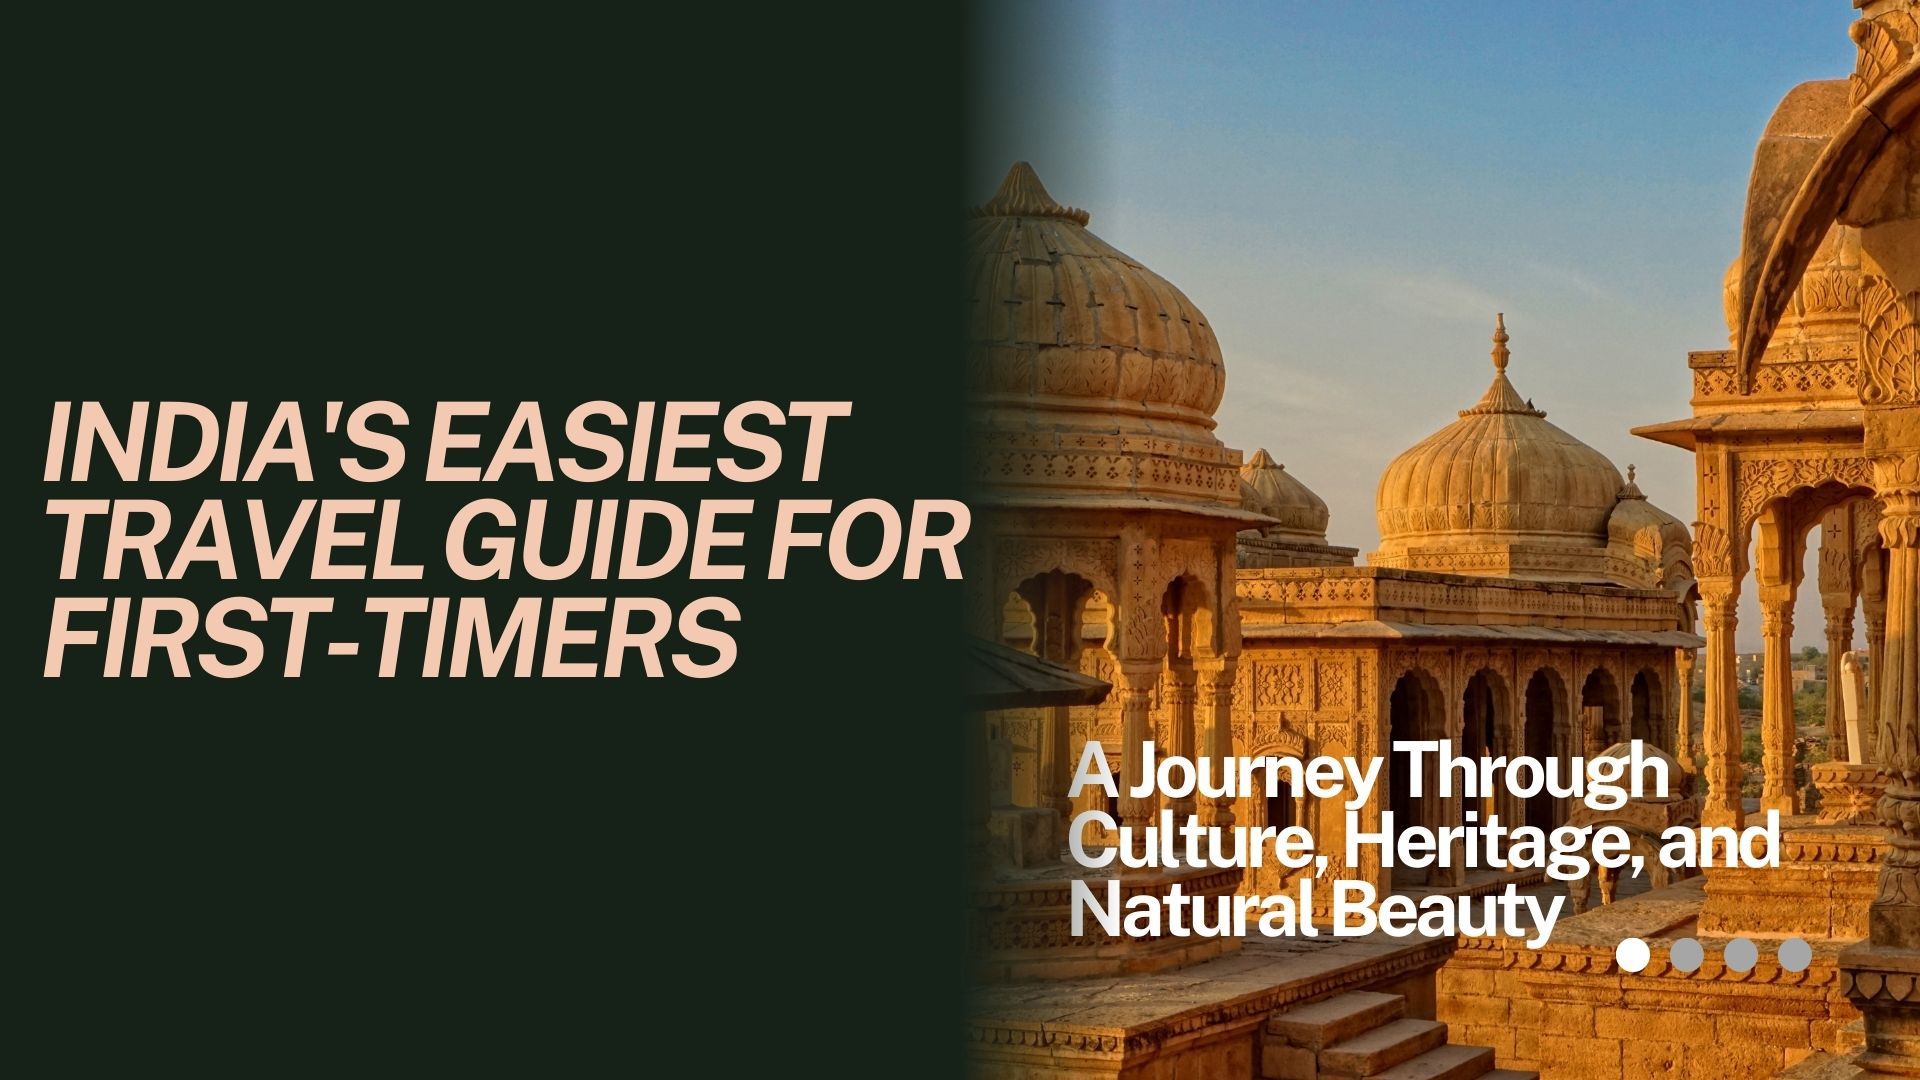 India's Easiest Travel Guide for First-Timers